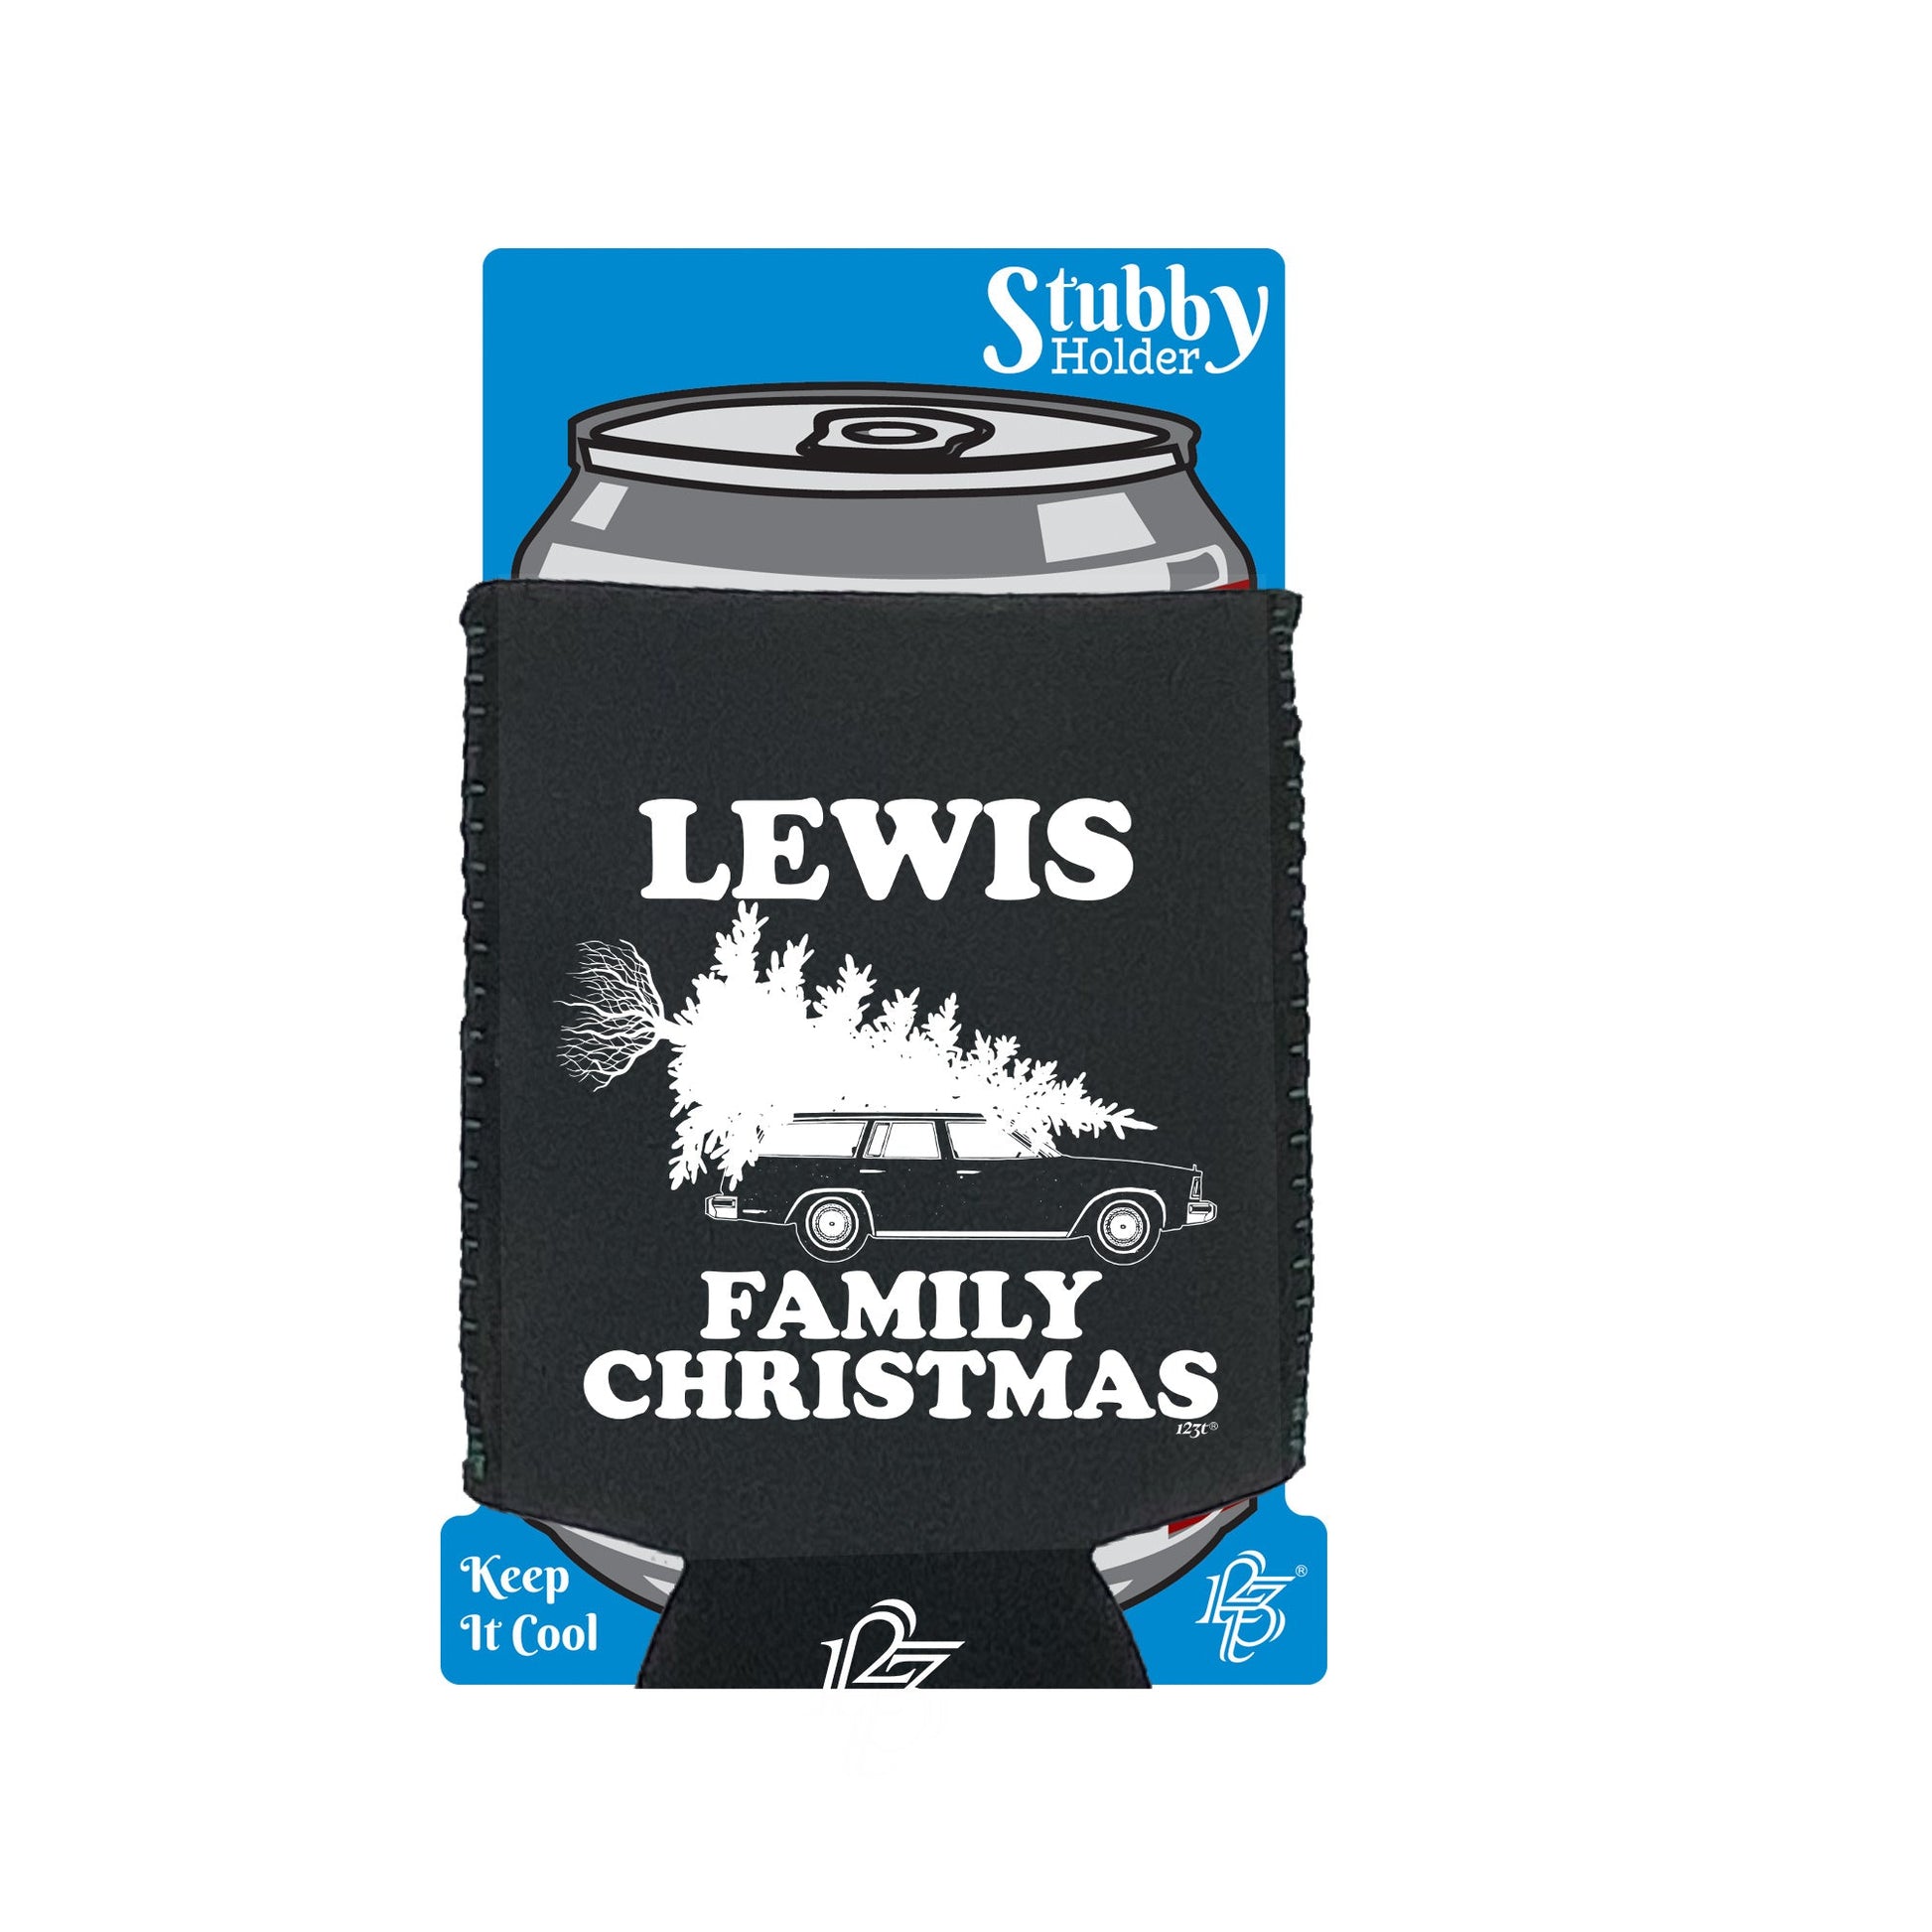 Family Christmas Lewis - Funny Stubby Holder With Base